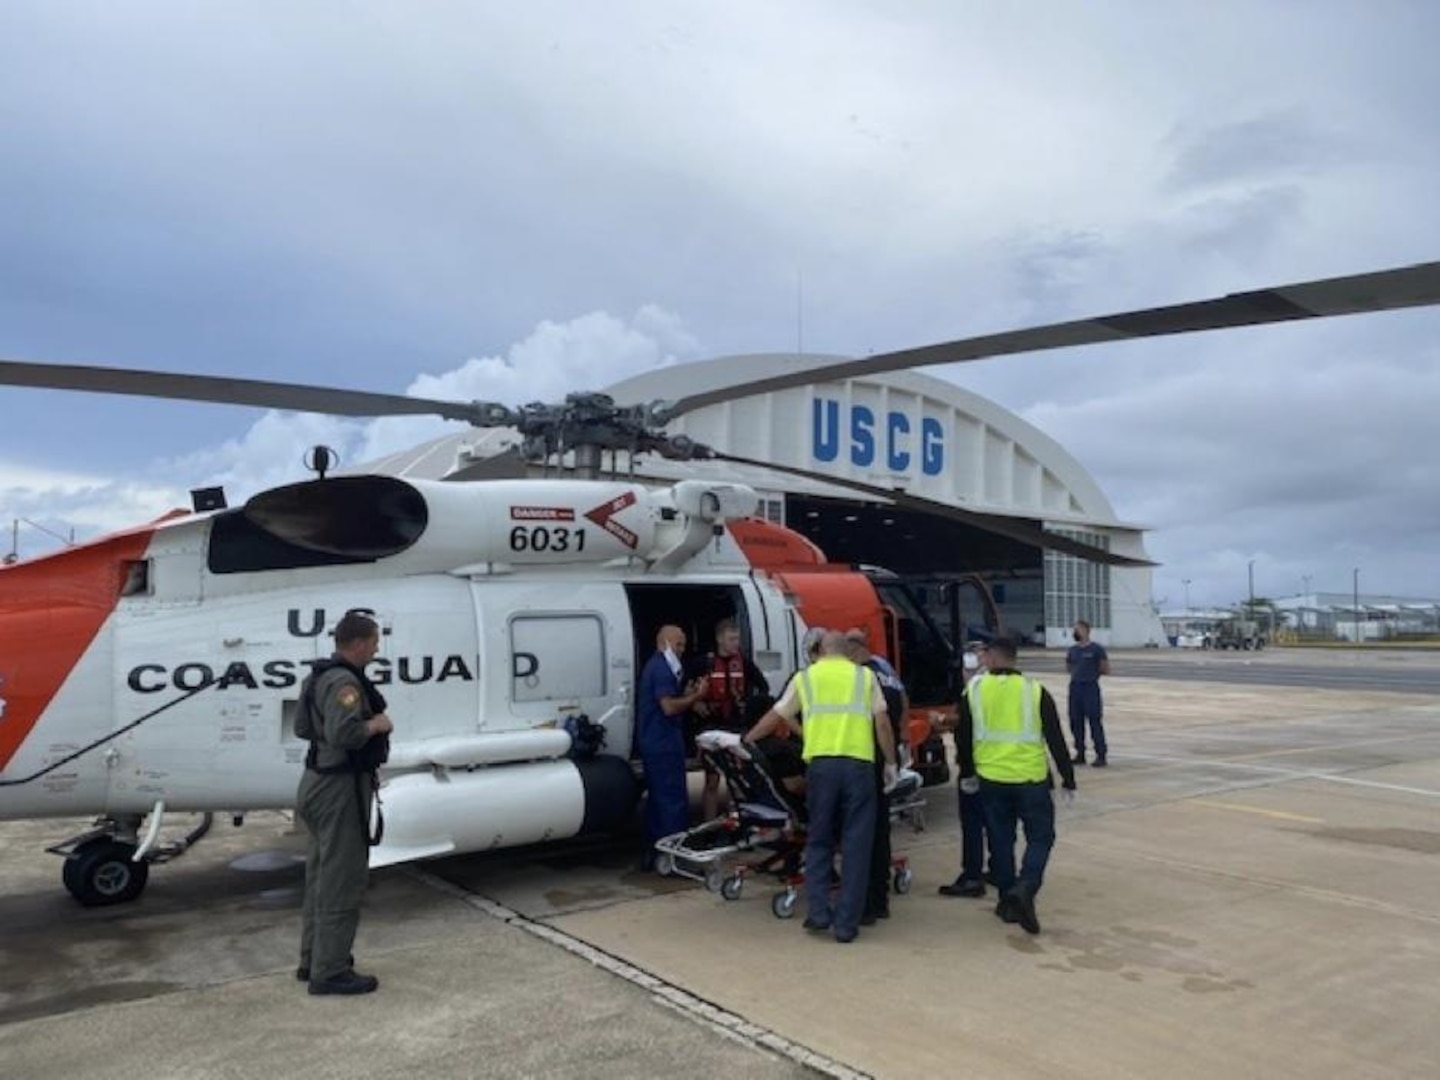 The crew of a Coast Guard Air Station Borinquen MH-60 Jayhawk helicopter rescued a swimmer in distress just off Rompe Olas Beach near downtown Aguadilla Sept. 13, 2021. The Coast Guard aircrew deployed their rescue swimmer and a rescue basket to recover the survivor, a woman in her mid thirties, who was flown to Air Station Borinquen, where Emergency Medical Service personnel evaluated her condition before being released after not presenting an injury or medical concern. (U.S. Coast Guard photo)